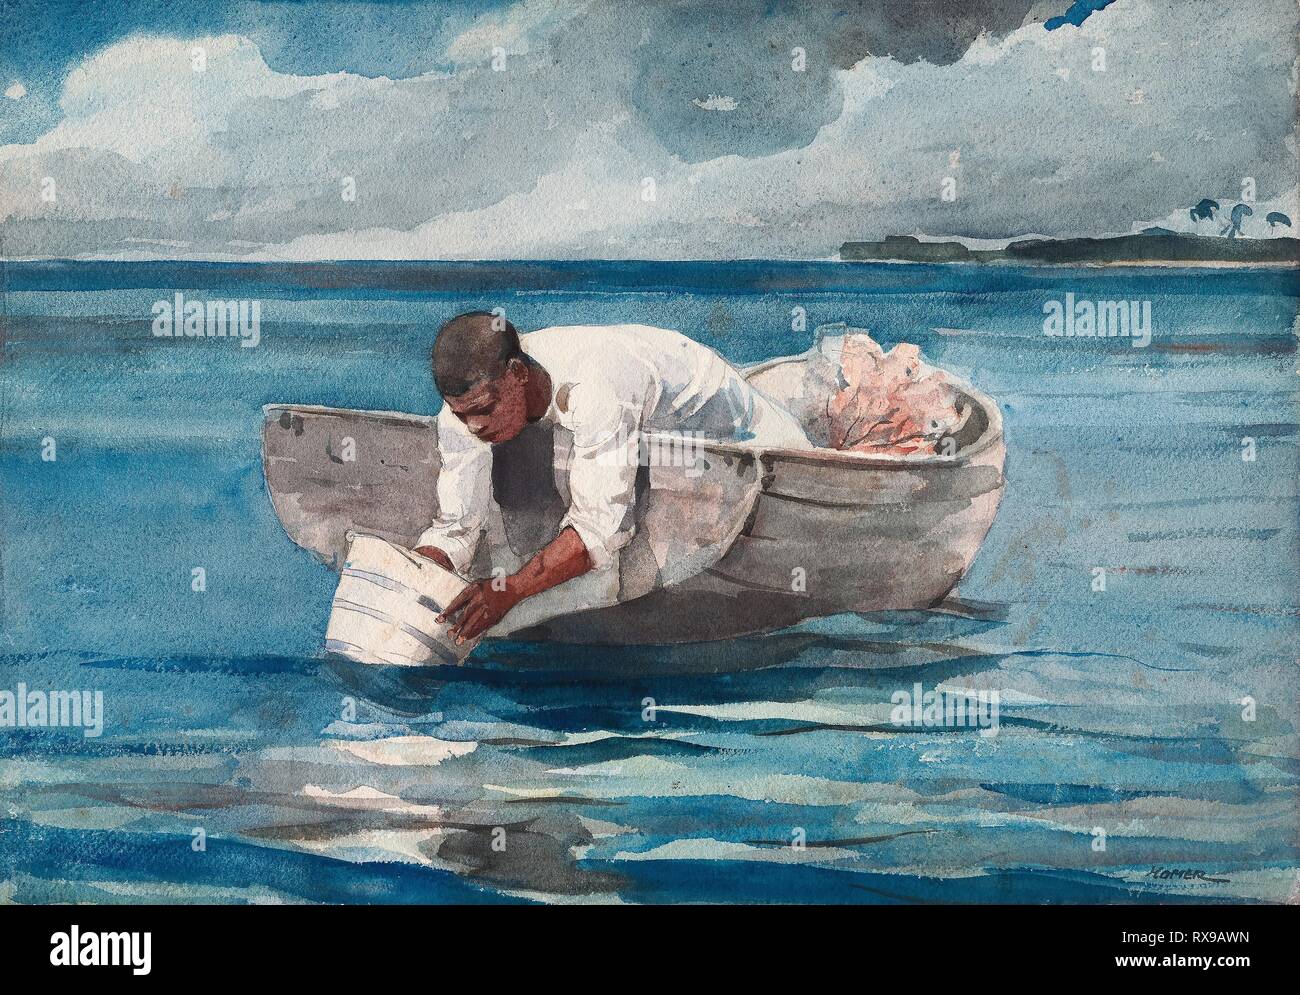 The Water Fan. Winslow Homer; American, 1836-1910. Date: 1898-1899. Dimensions: 374 x 534 mm. Watercolor, with blotting and touches of scraping, over graphite, on thick, rough twill-textured, ivory wove paper. Origin: United States. Museum: The Chicago Art Institute. Stock Photo